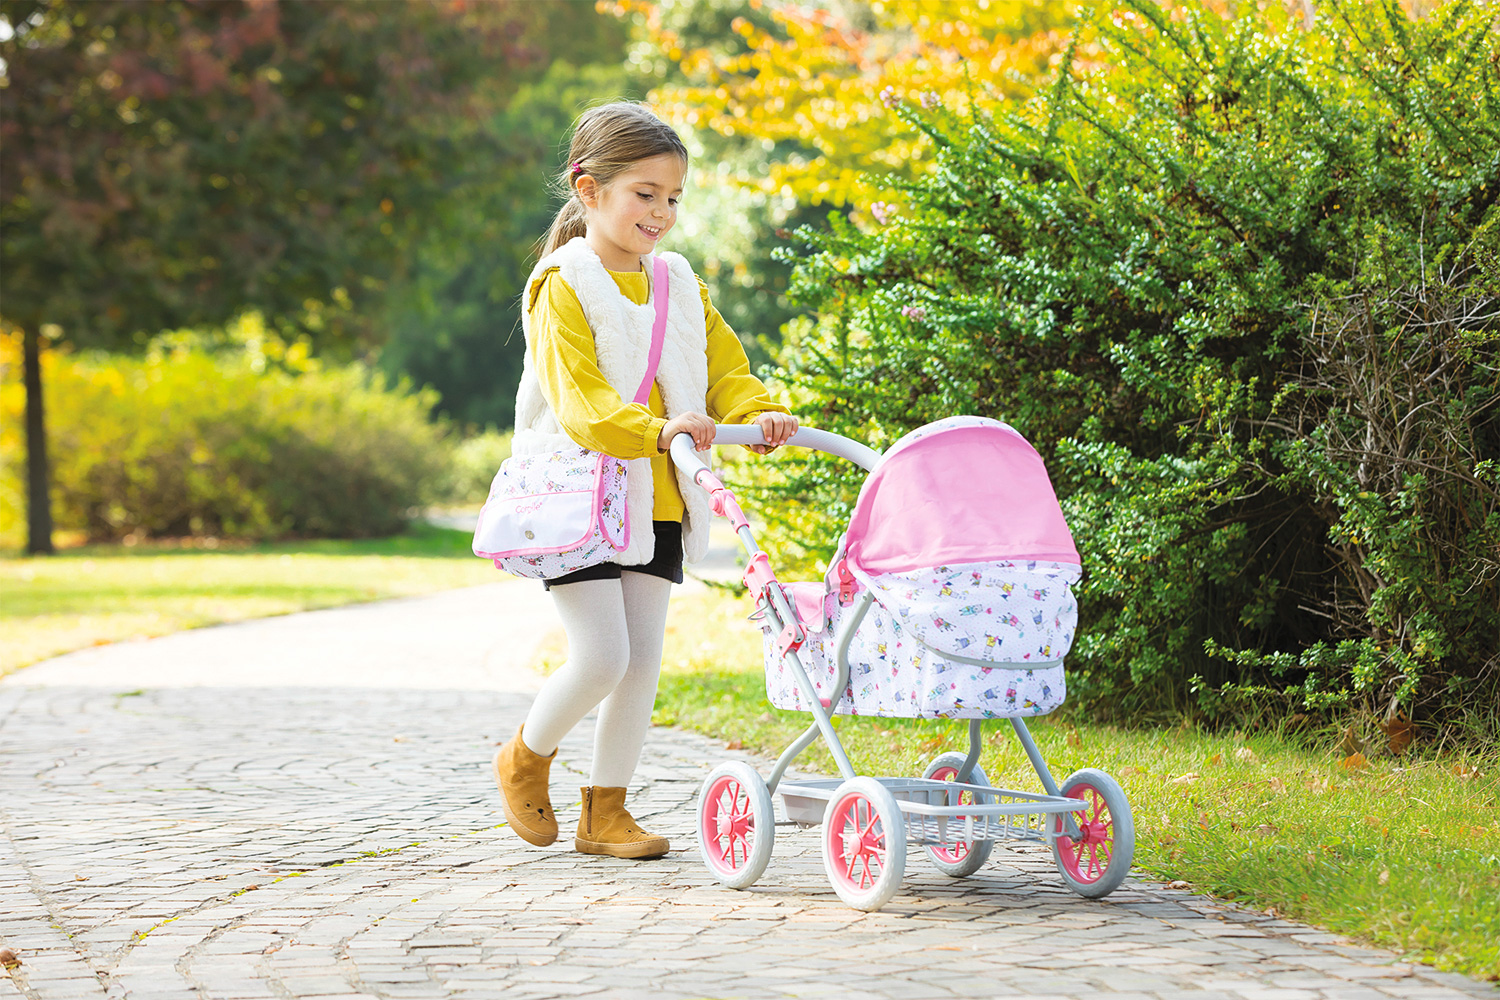 Corolle Doll Carriage & Diaper Bag 